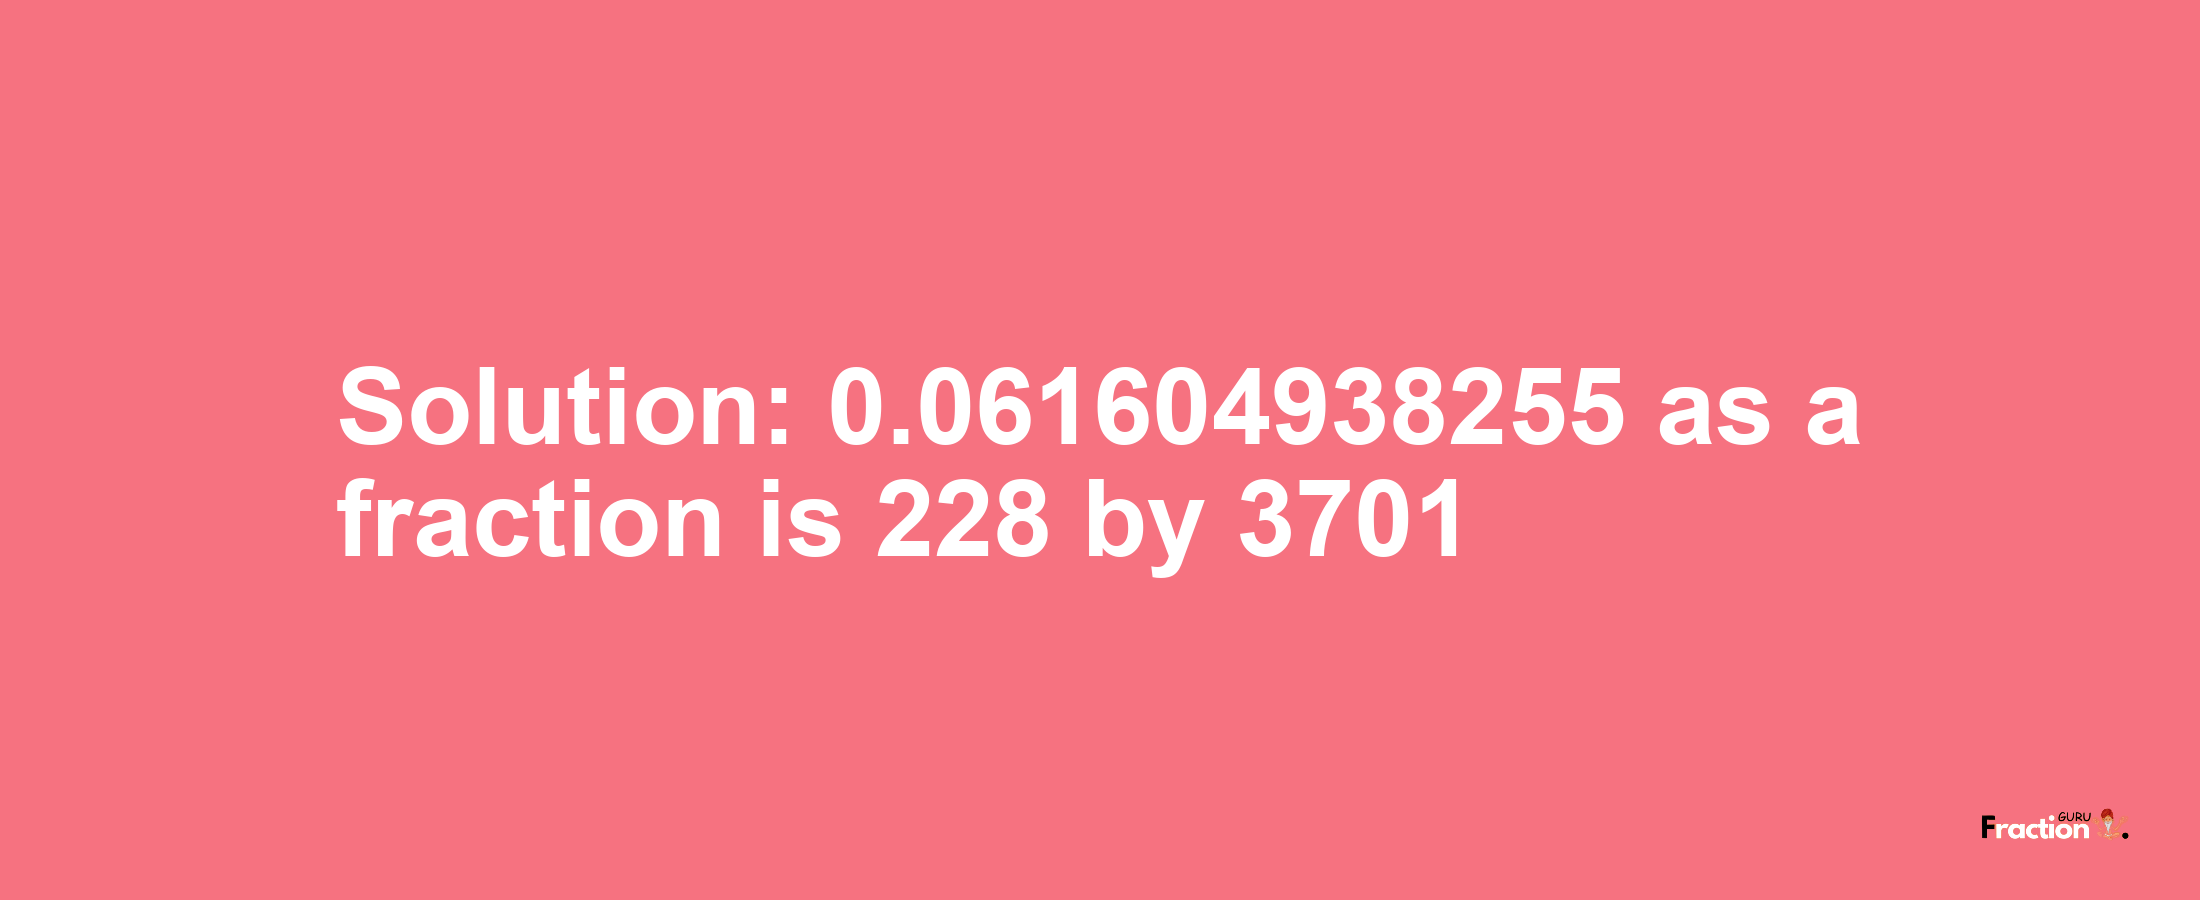 Solution:0.061604938255 as a fraction is 228/3701